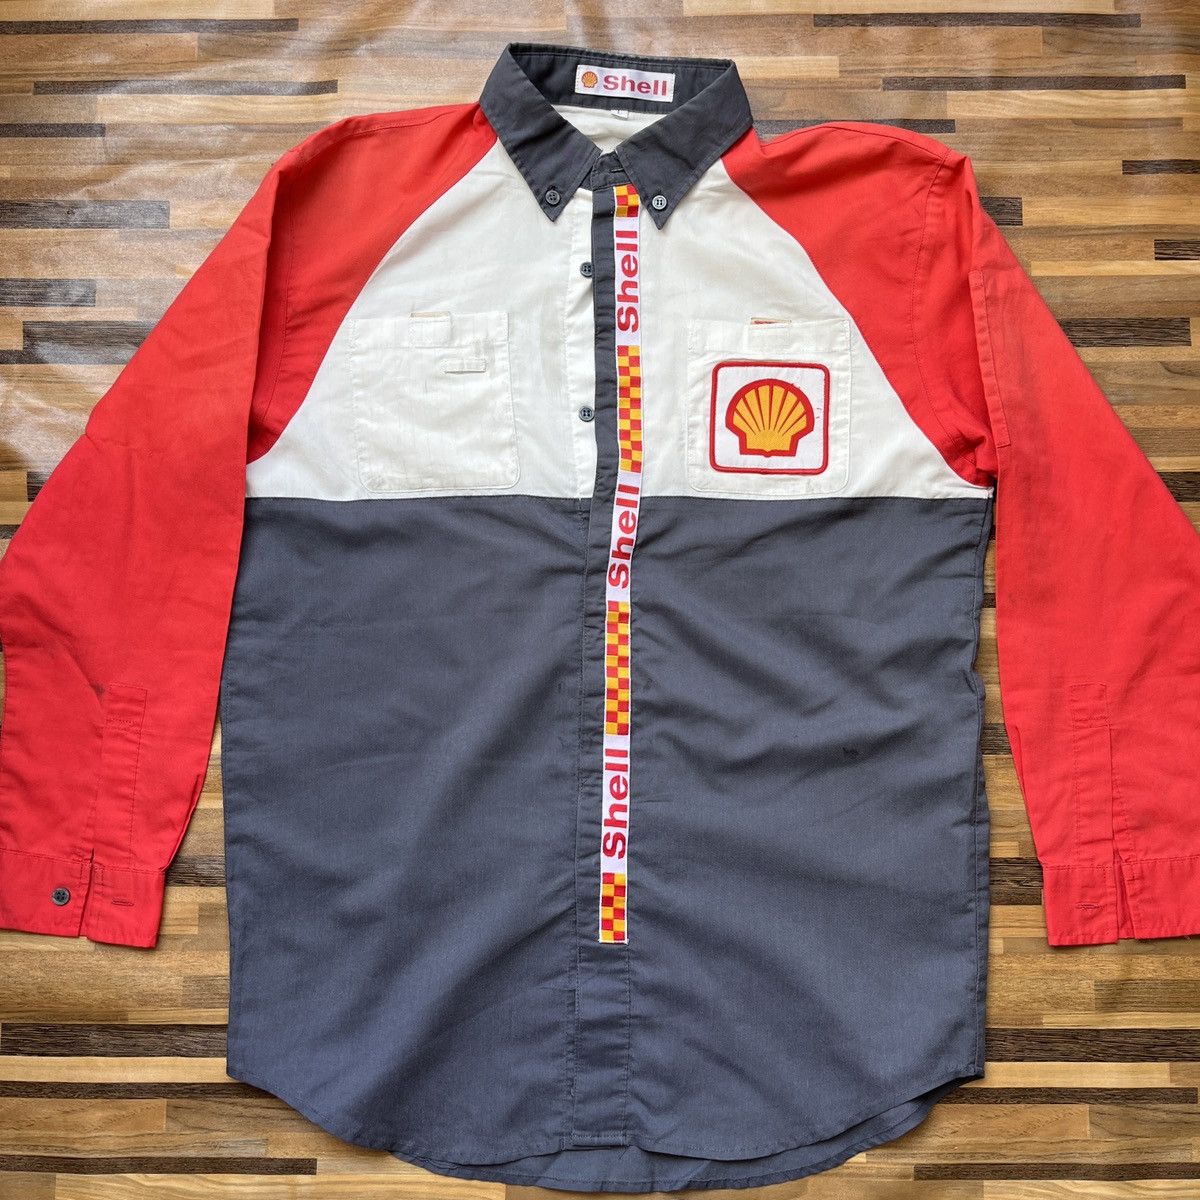 Shell Uniform Workers Vintage Japanese Outlet 1990s - 16